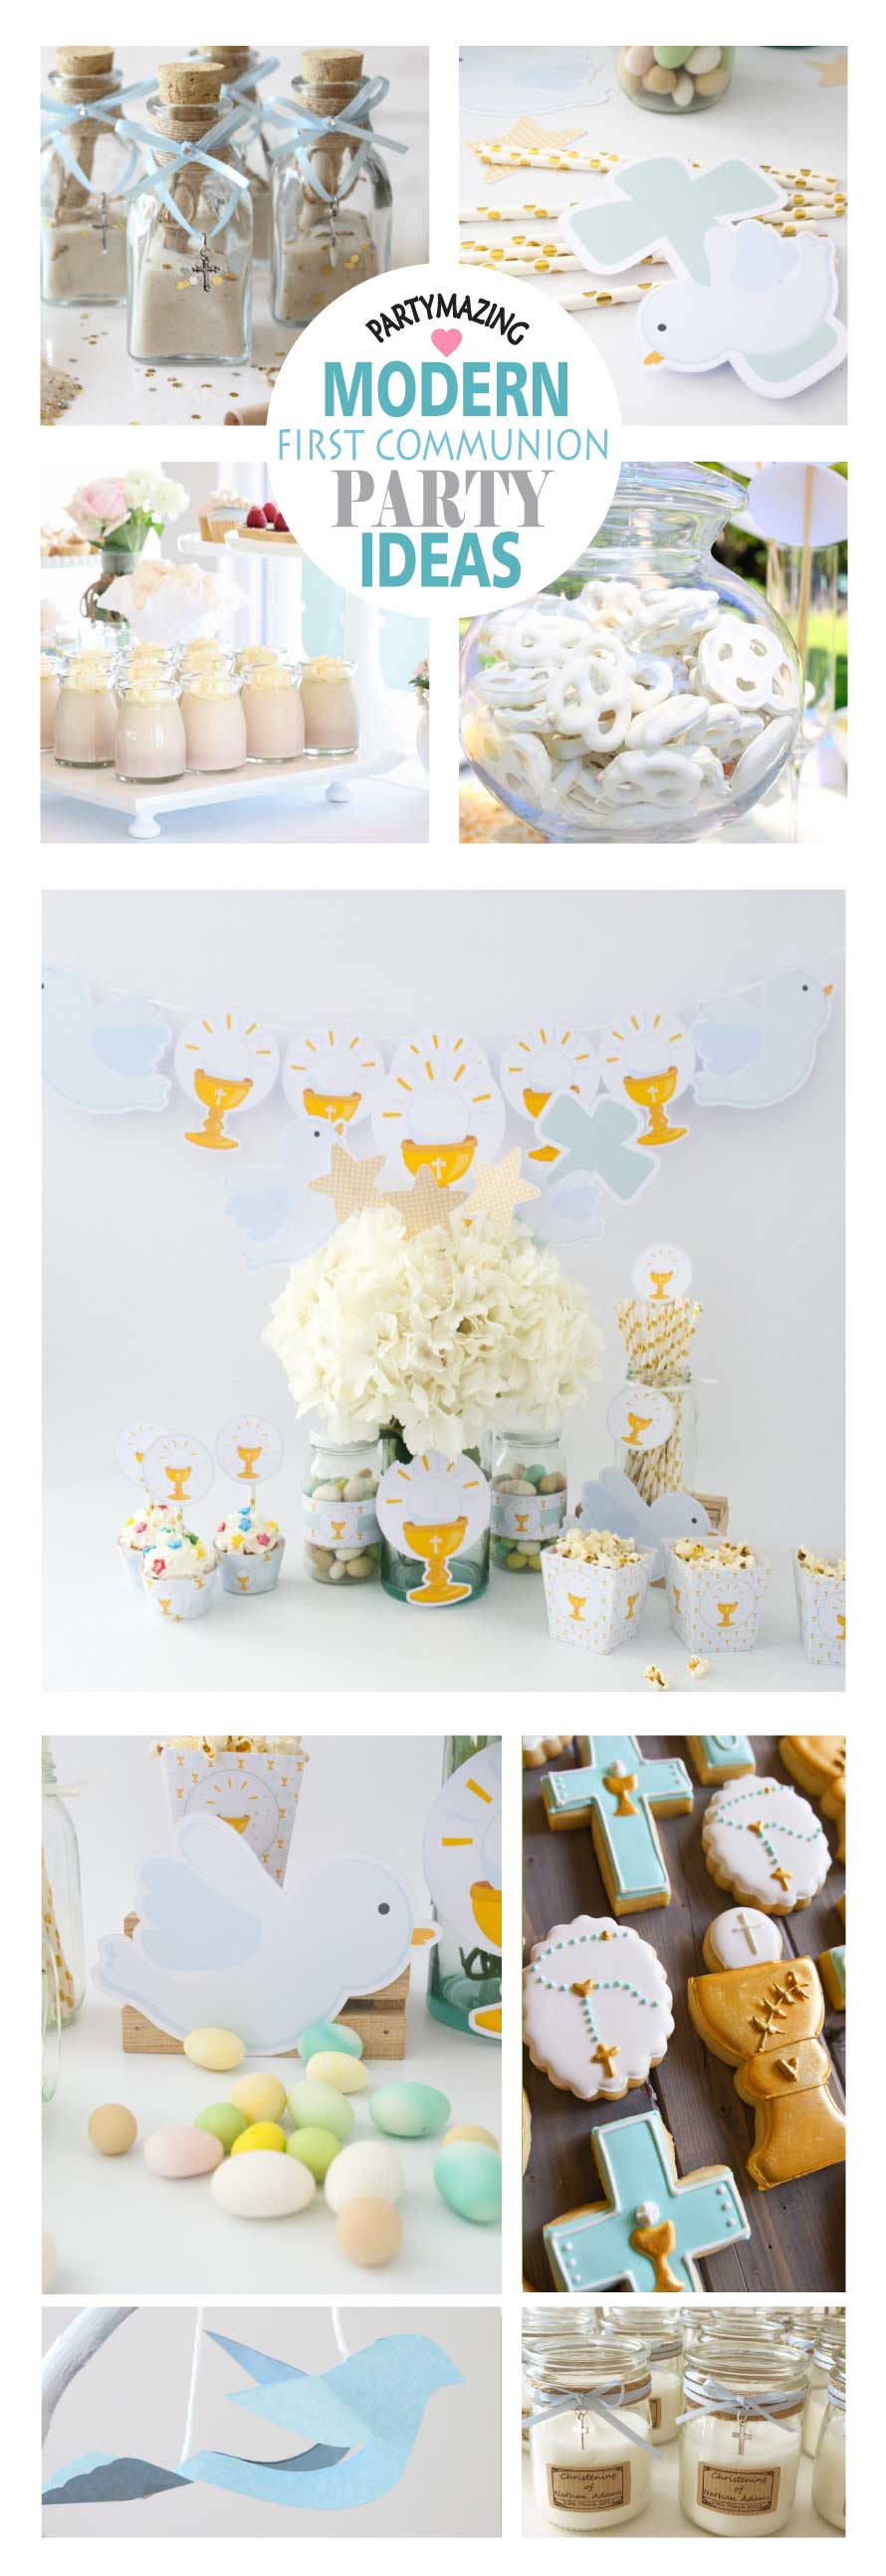 DIY PAPER FIRST COMMUNION DECOR - Are you planning your first communion as a girl or a boy? Here are 12+ first communion ideas to inspire you. Many DIY ideas so you can create an unforgettable event.